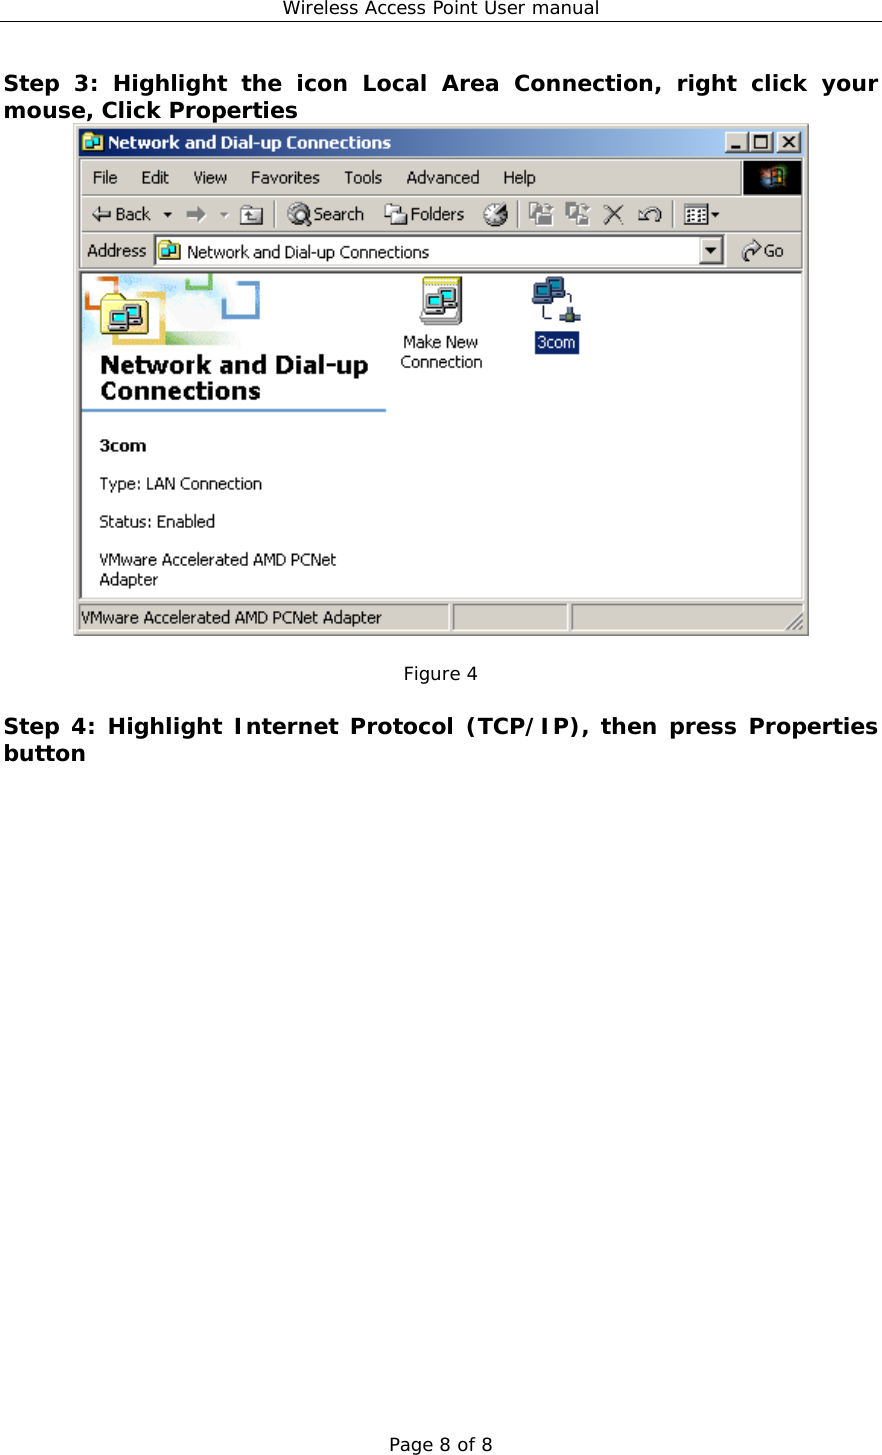 Wireless Access Point User manual Page 8 of 8 Step 3: Highlight the icon Local Area Connection, right click your mouse, Click Properties   Figure 4  Step 4: Highlight Internet Protocol (TCP/IP), then press Properties button 